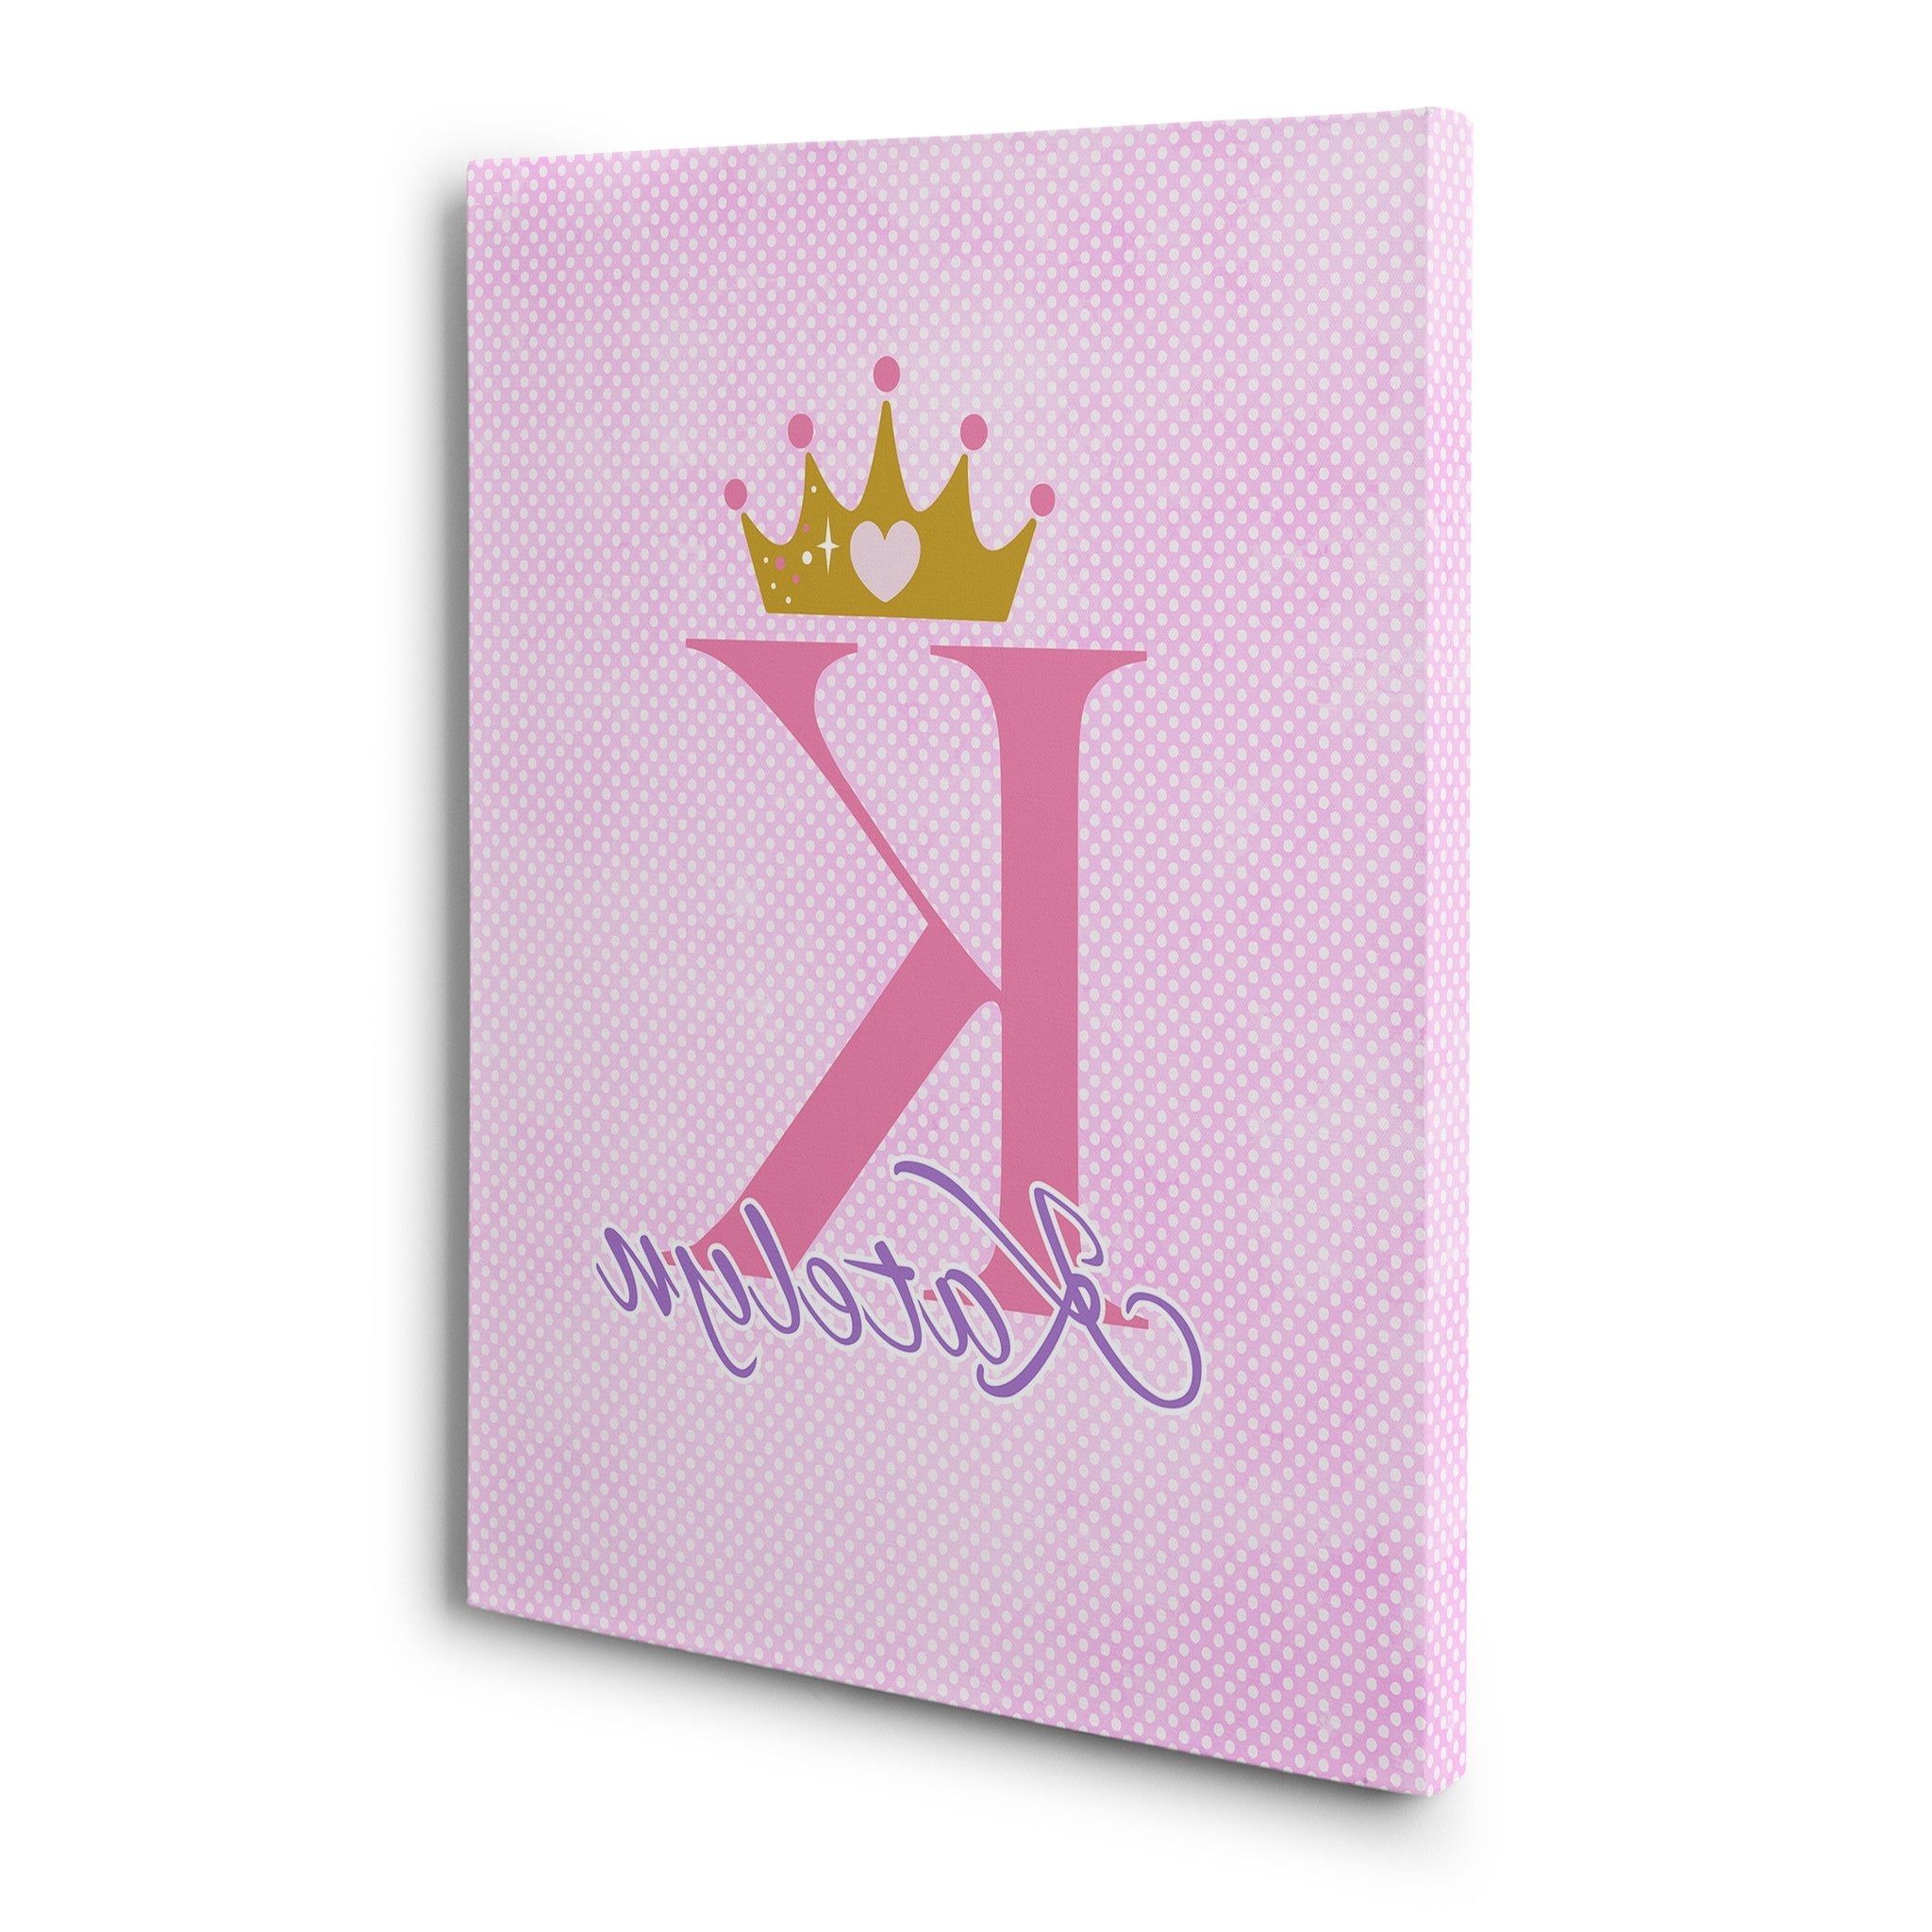 Most Current Pink Polka Dot Customized Princess Canvas (View 11 of 15)